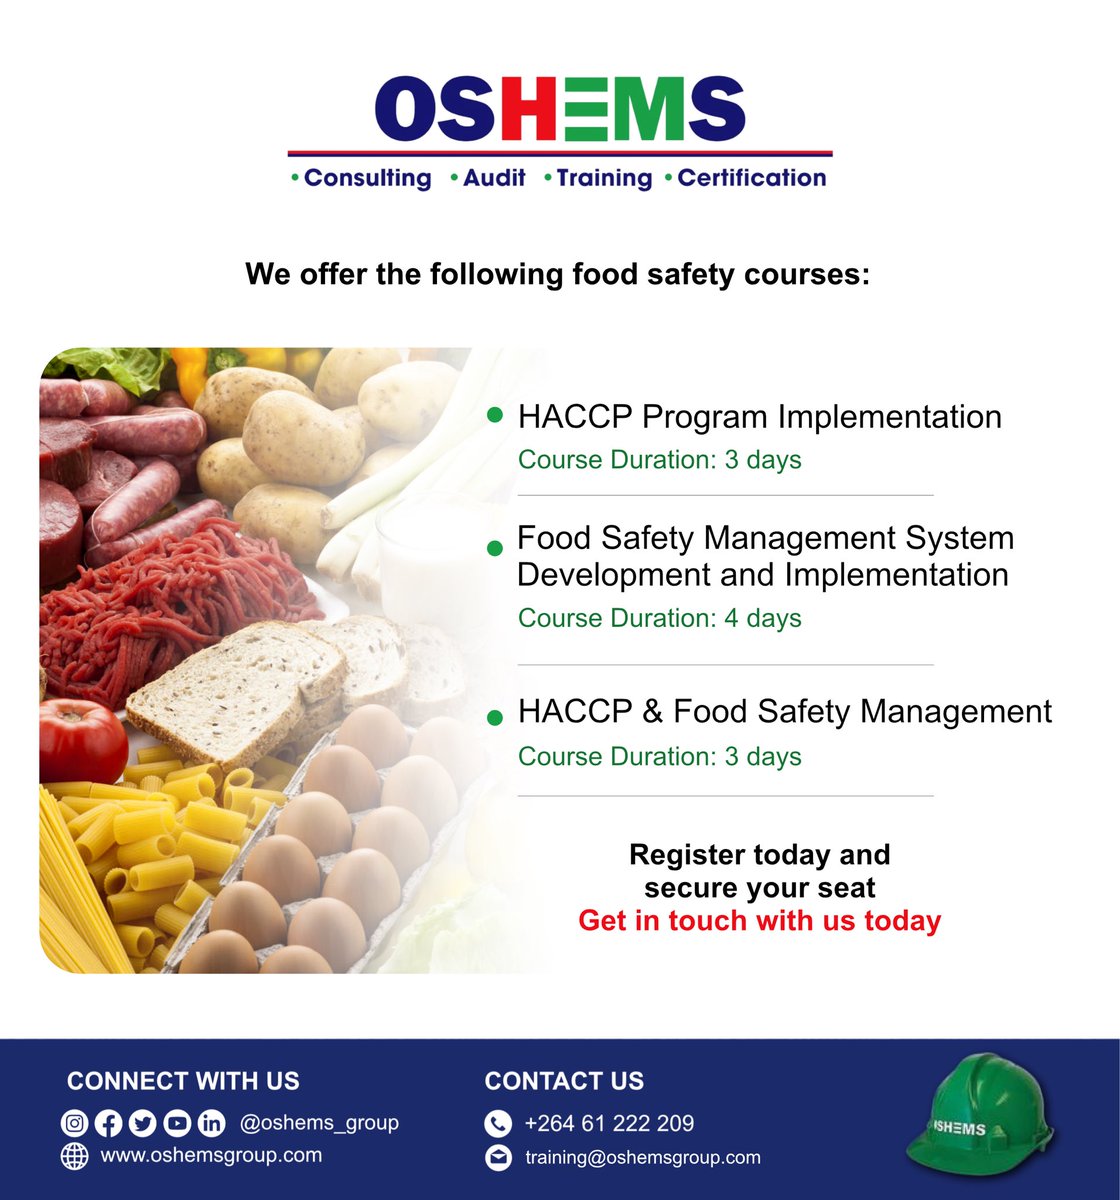 For more information on our food safety courses, give us a call on +264 61 222 209 or send an email to info@oshemsgroup.com 

#foodsafetytraining #foodsafety #certification #safetyculture #prioritizesafety #callustoday #follow #windhoek #namibia🇳🇦 #africa #eroswindhoek